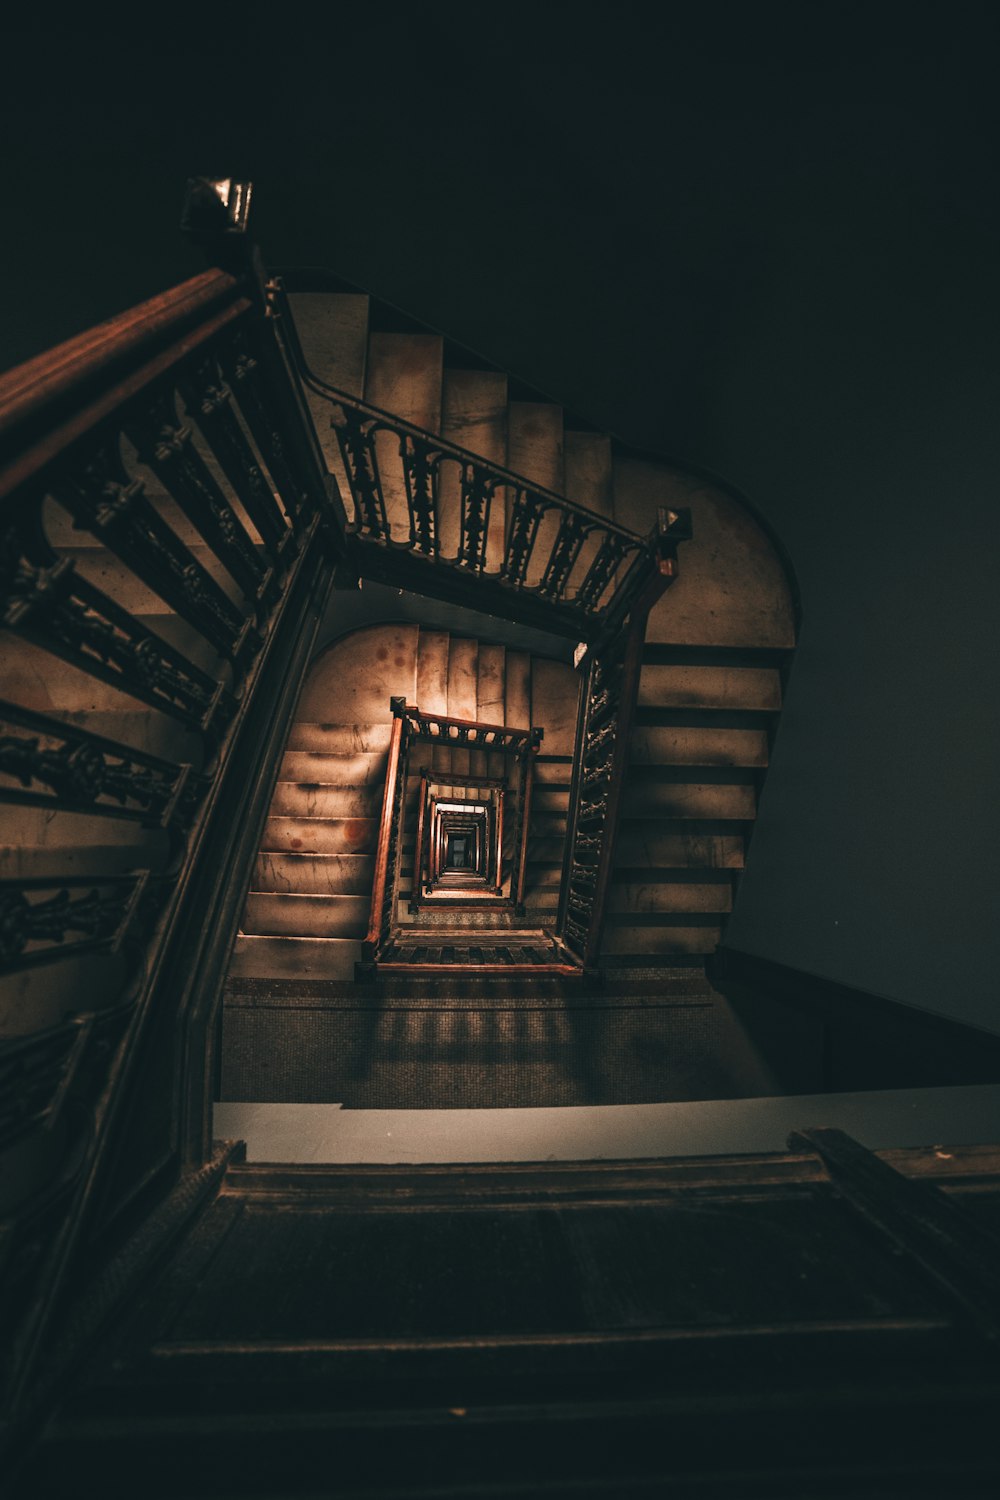 brown stairs